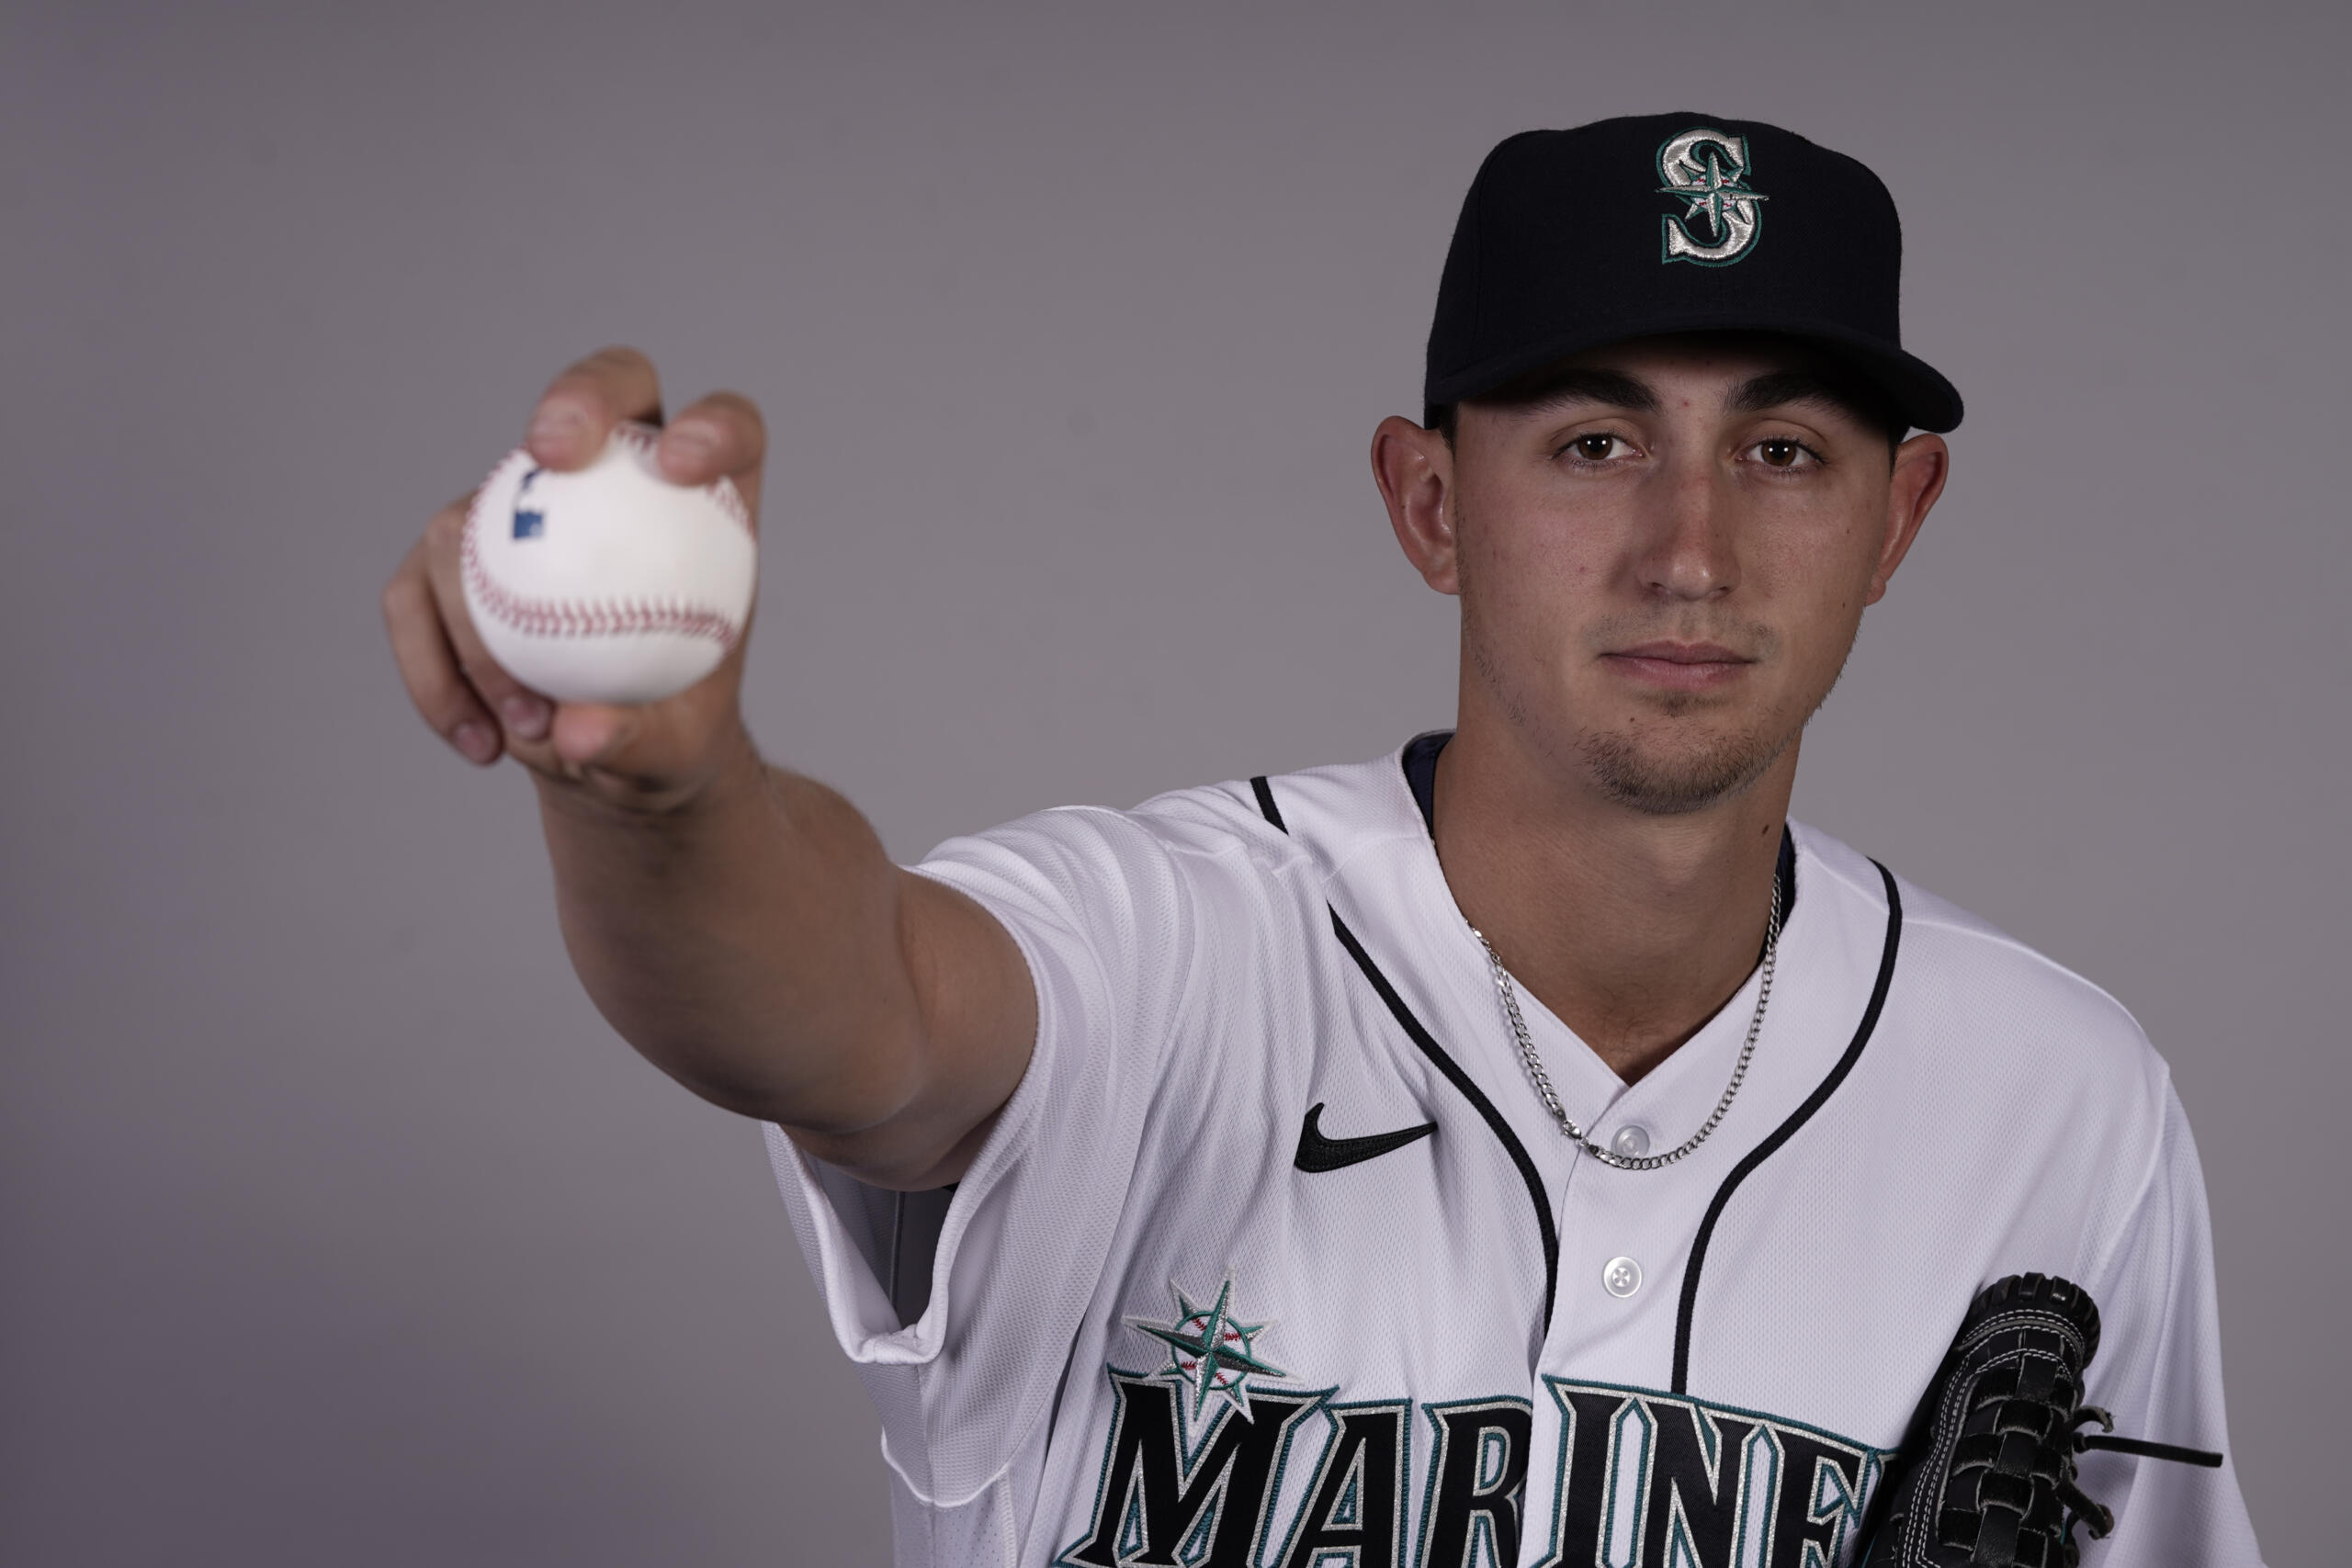 Seattle Mariners pitching prospect George Kirby has been called up to make his major league debut on Sunday, May 8, 2022.